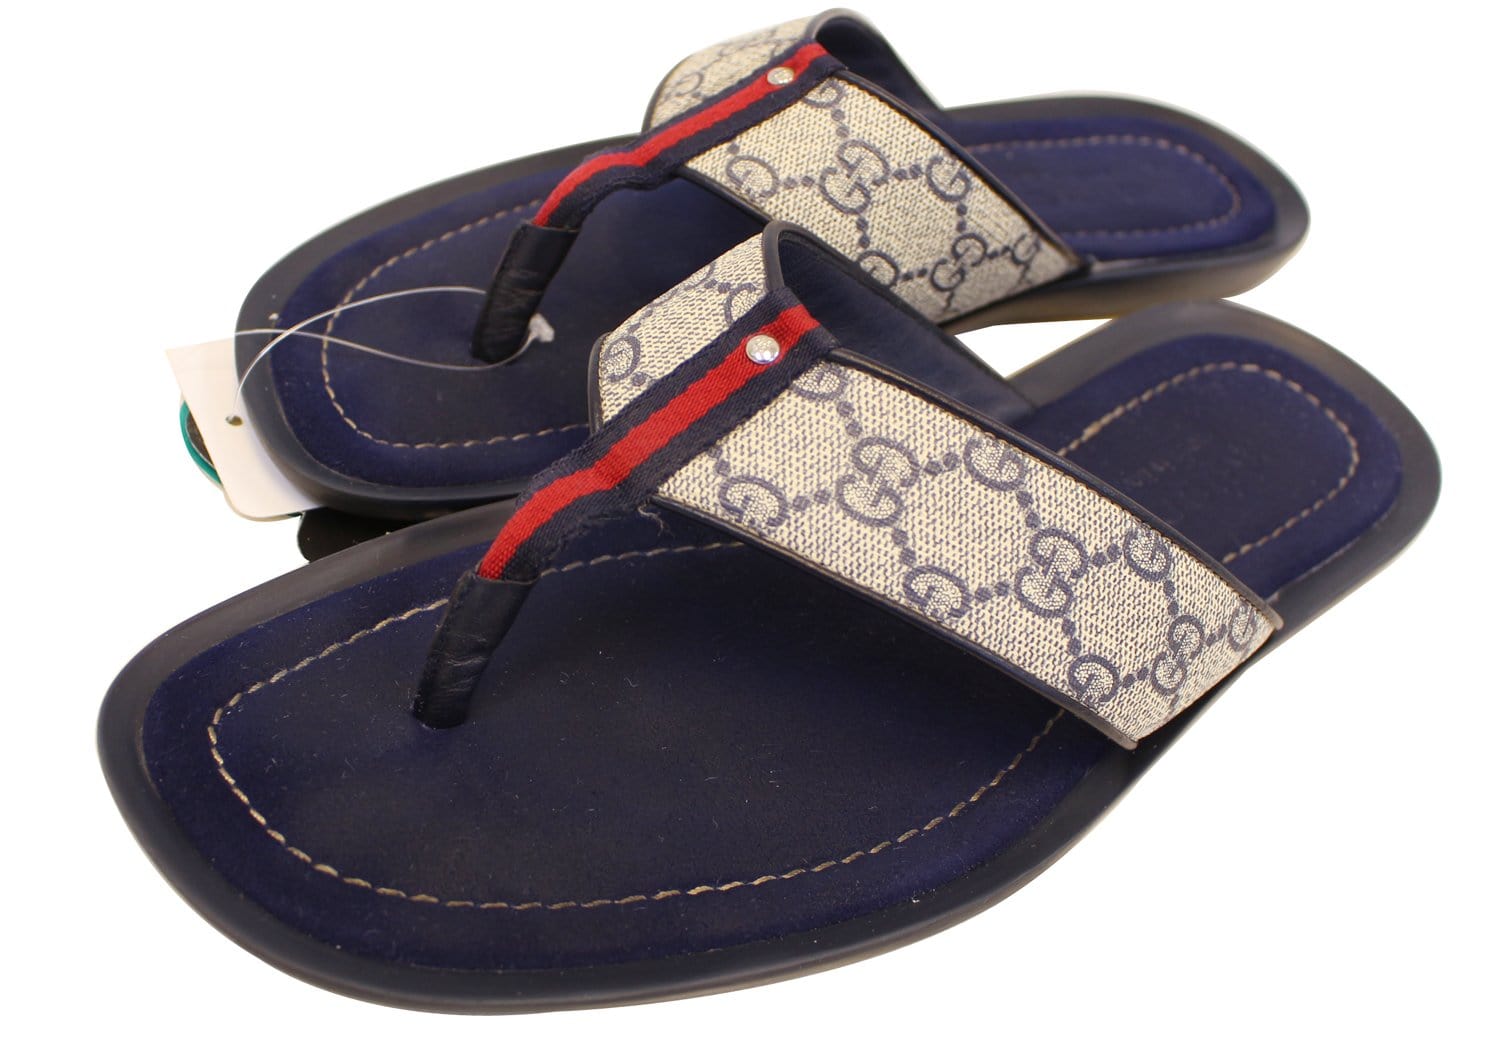 Gucci Flip Flops in Surulere - Shoes, Brothersman Luxury